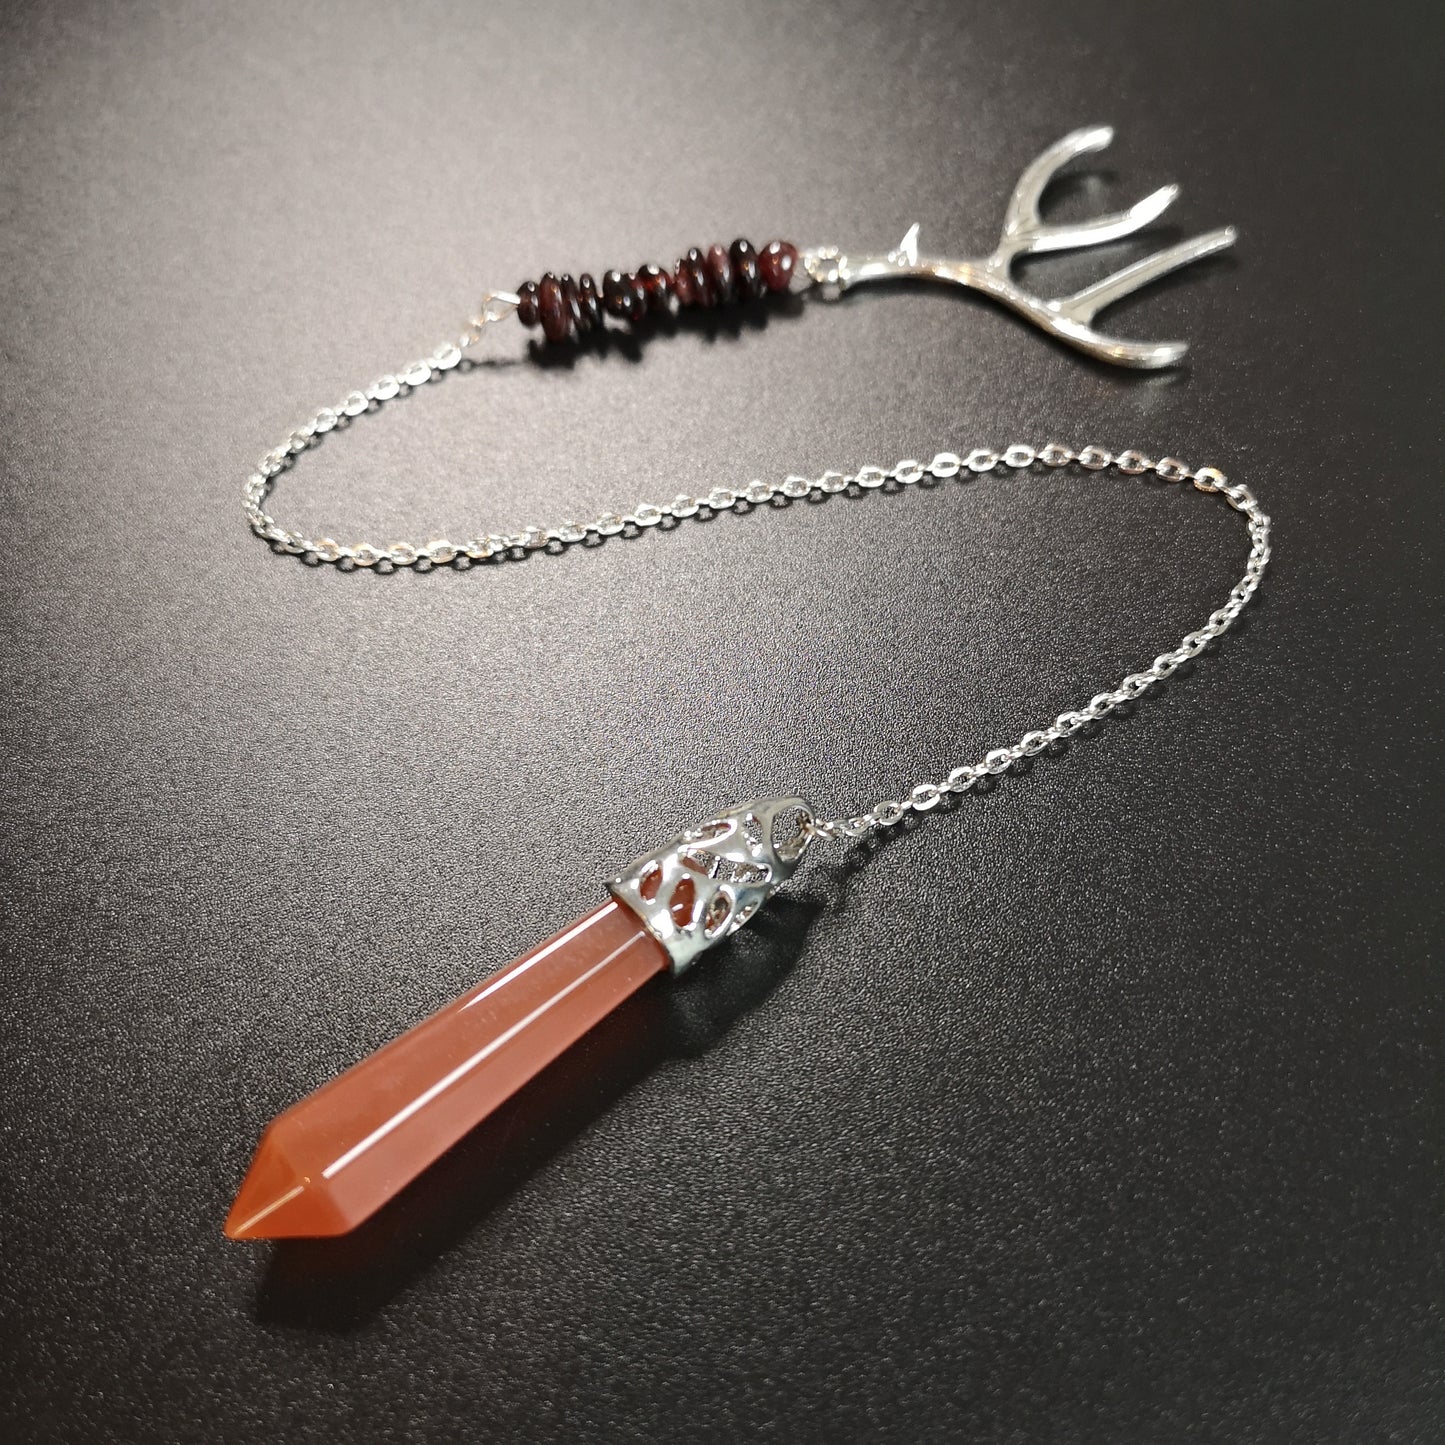 Carnelian, garnet and antler dowsing pendulum - The French Witch shop